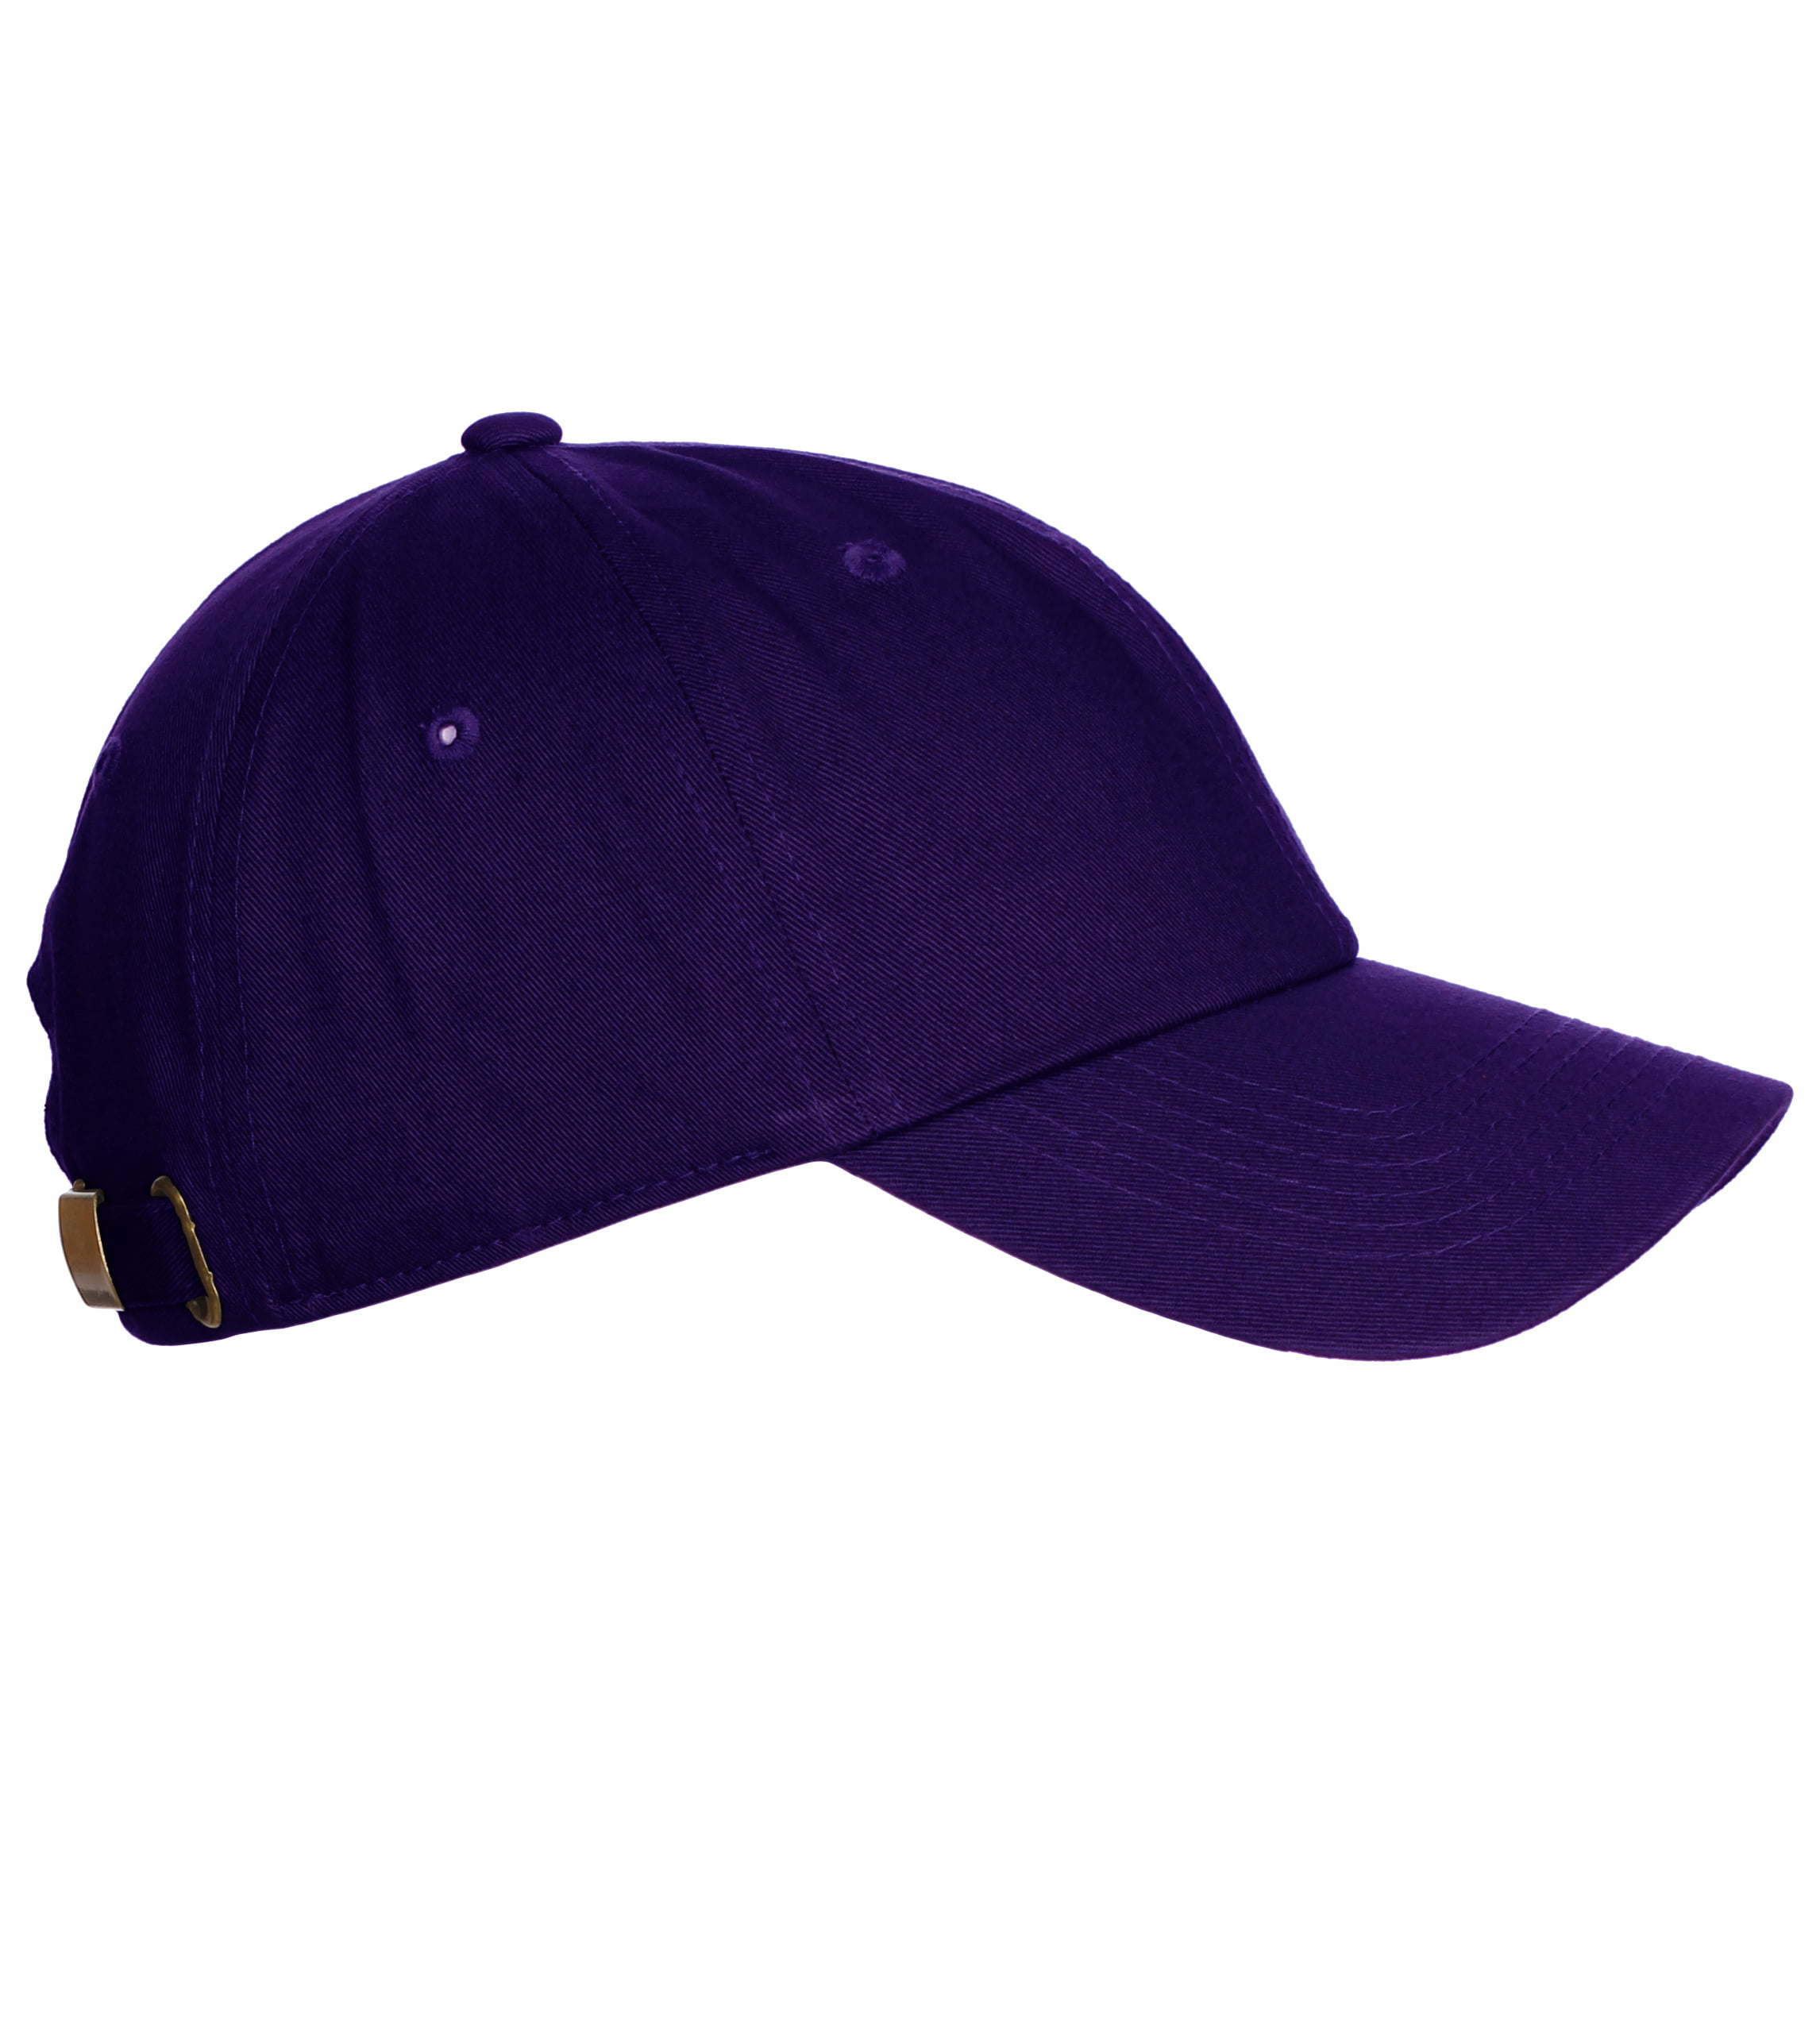 to Team White Letter Letter Purple Gold Customized A M Hat Baseball Intial Cap Colors, Z